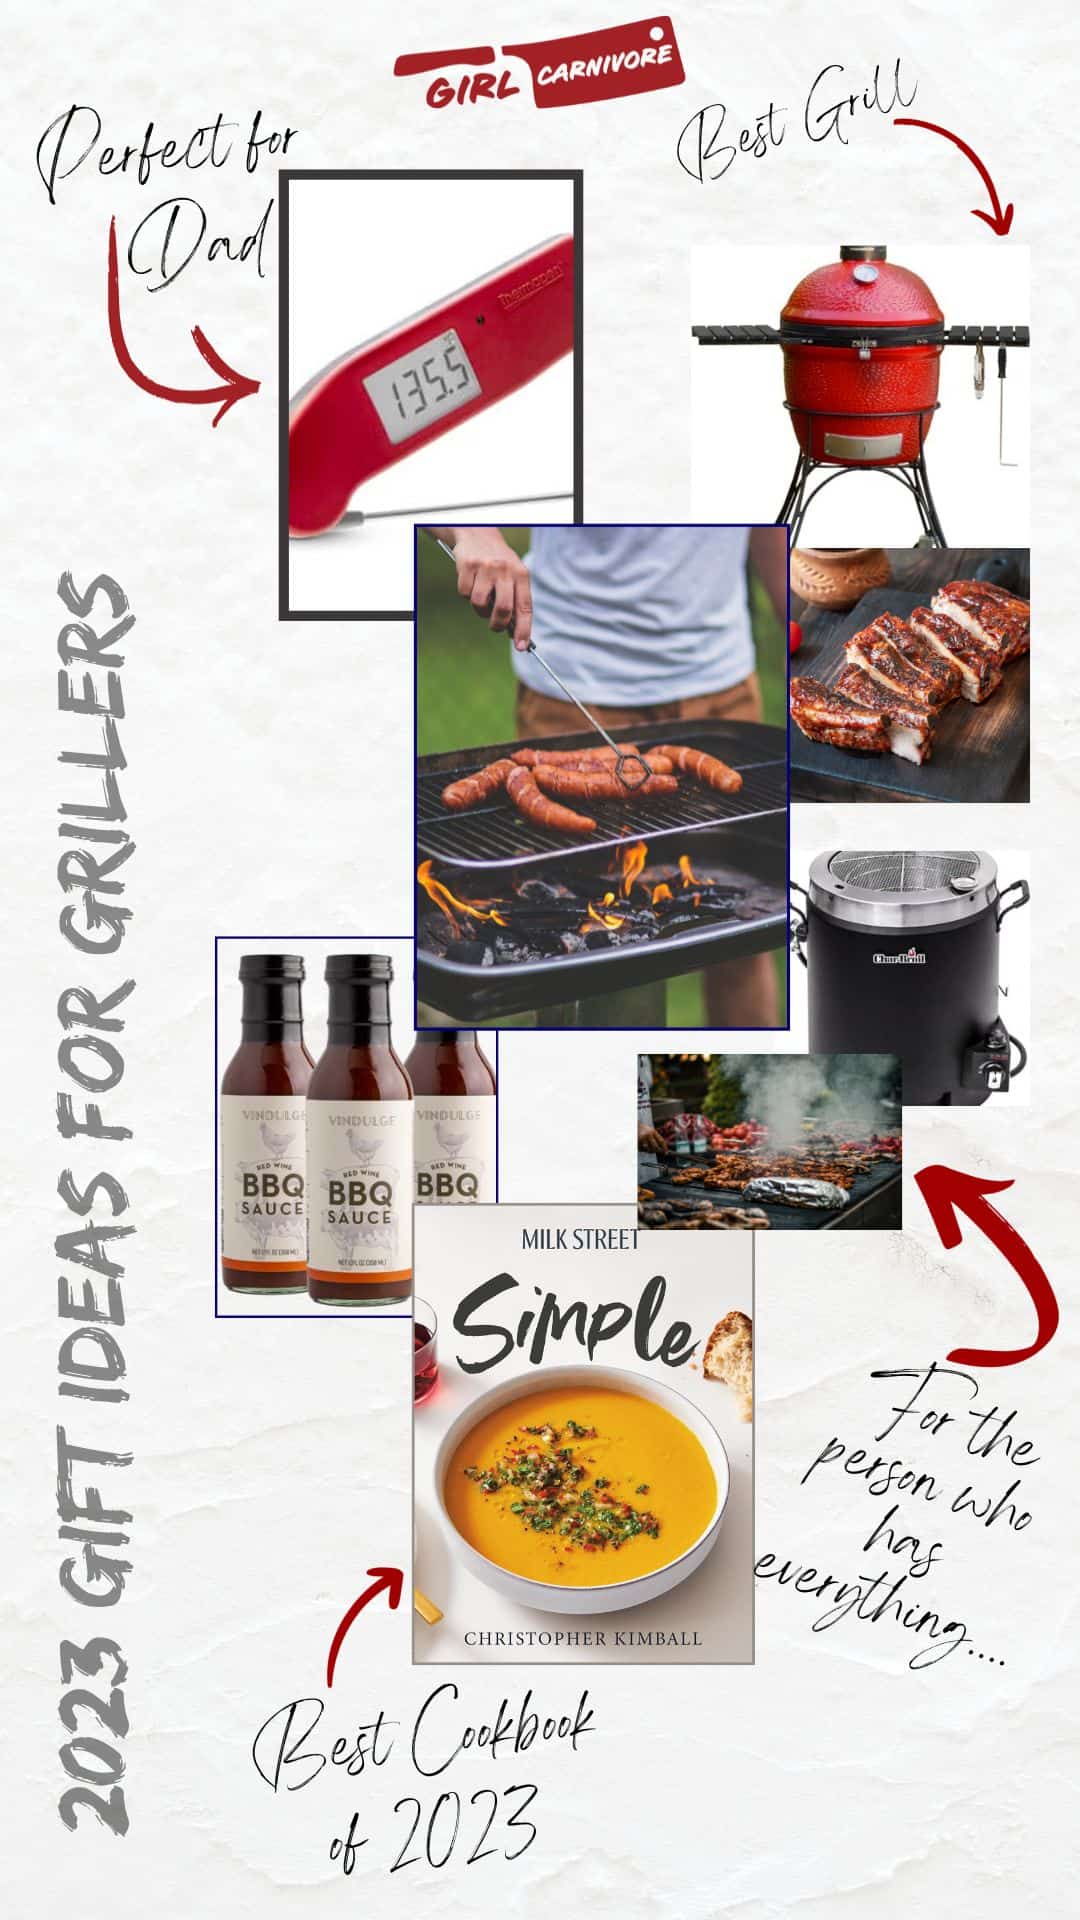 Discover the perfect grilling gifts for the BBQ enthusiast in your life.